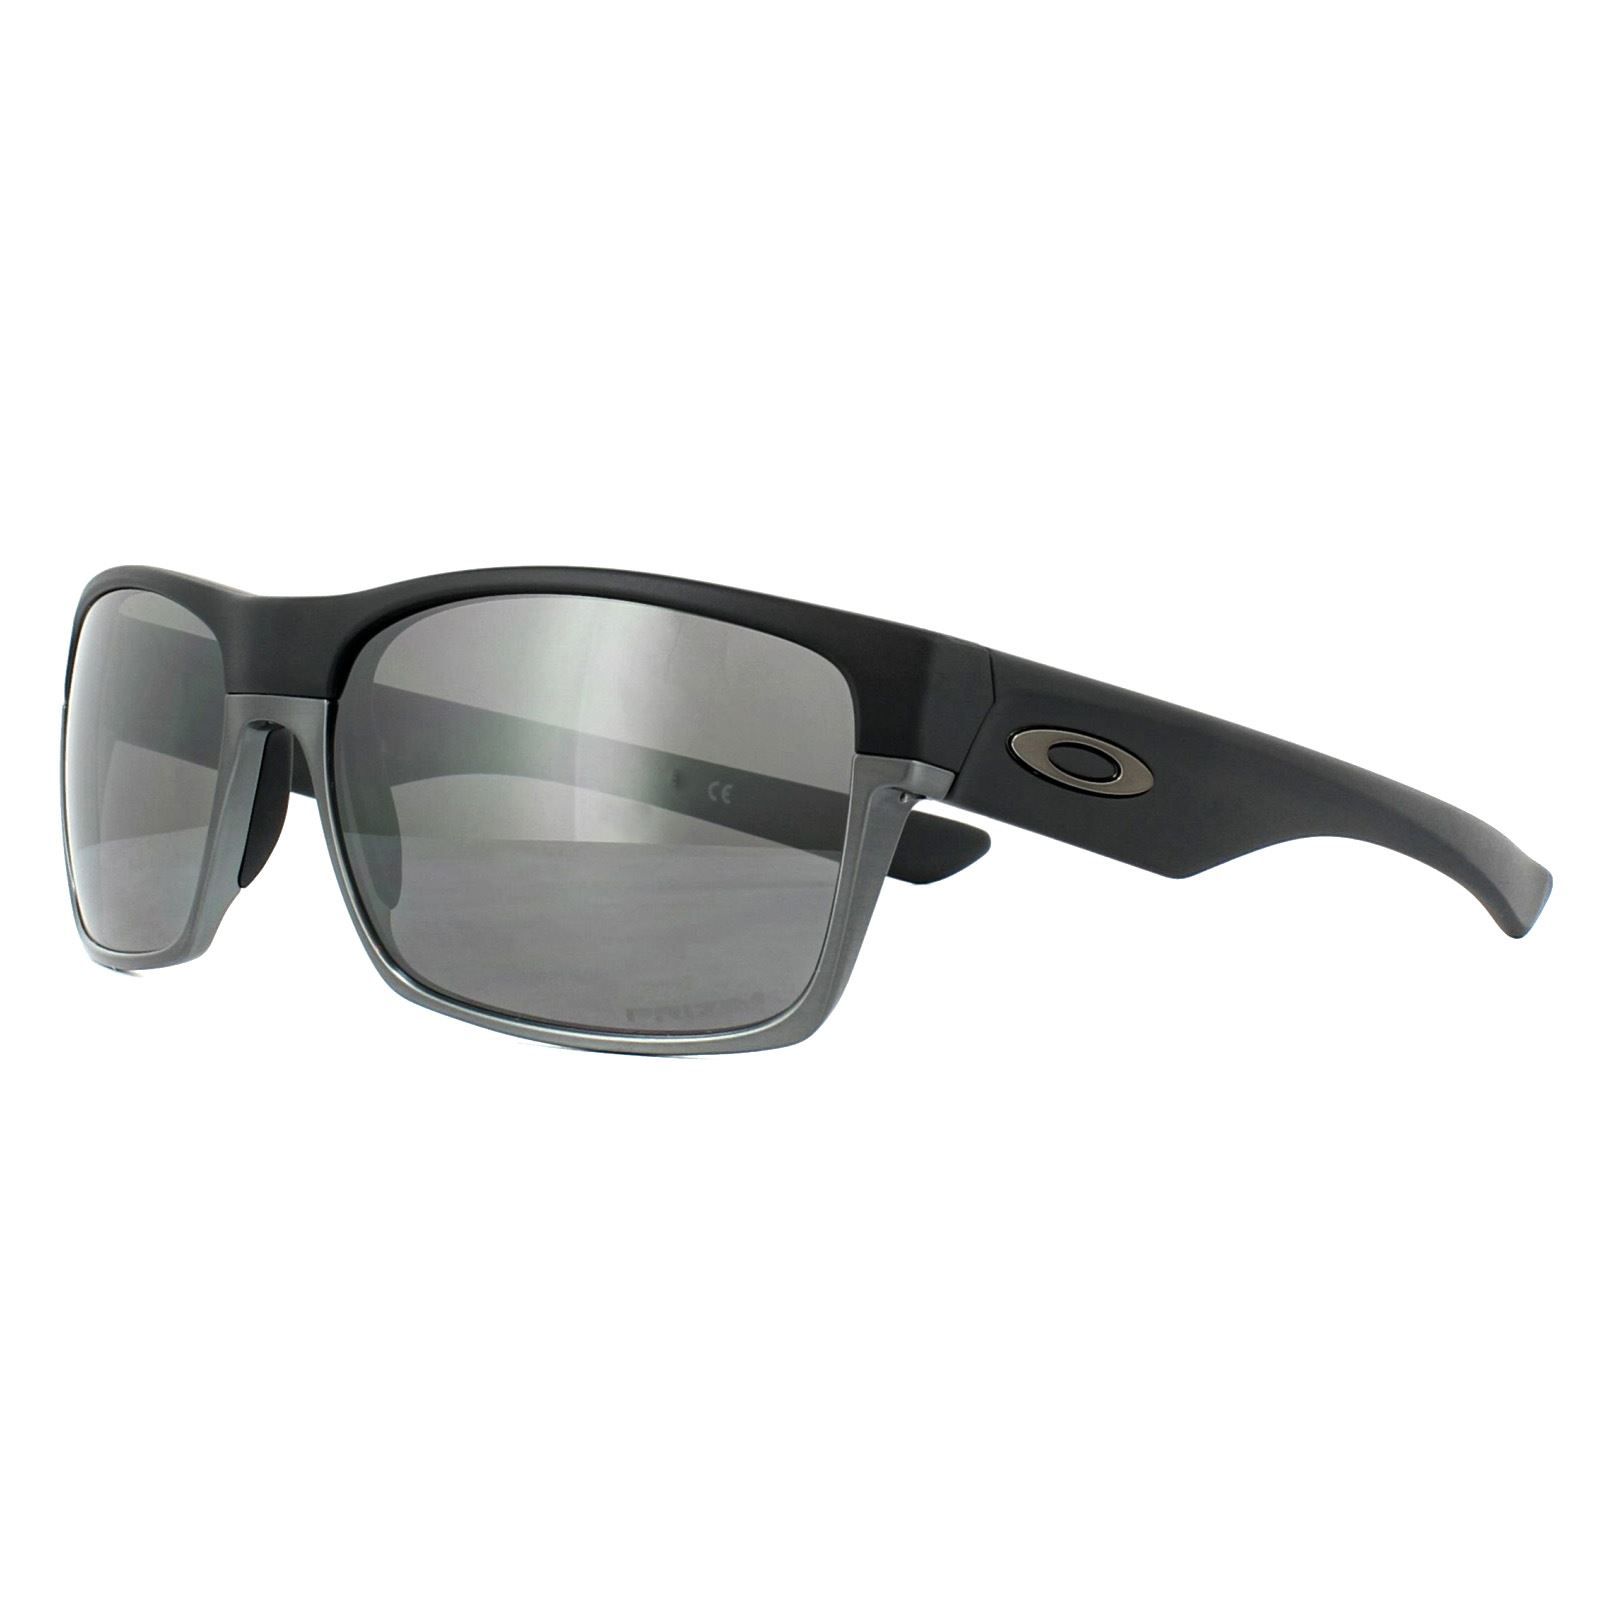 Oakley Sunglasses TwoFace OO9189-38 Matt Black Prizm Daily Polarized literally a two-tone frame with an aluminium lower frame and O Matter upper frame. Classic styling and the usual quality lenses from Oakley combine to give a winning pair of ultra modern sunglasses.